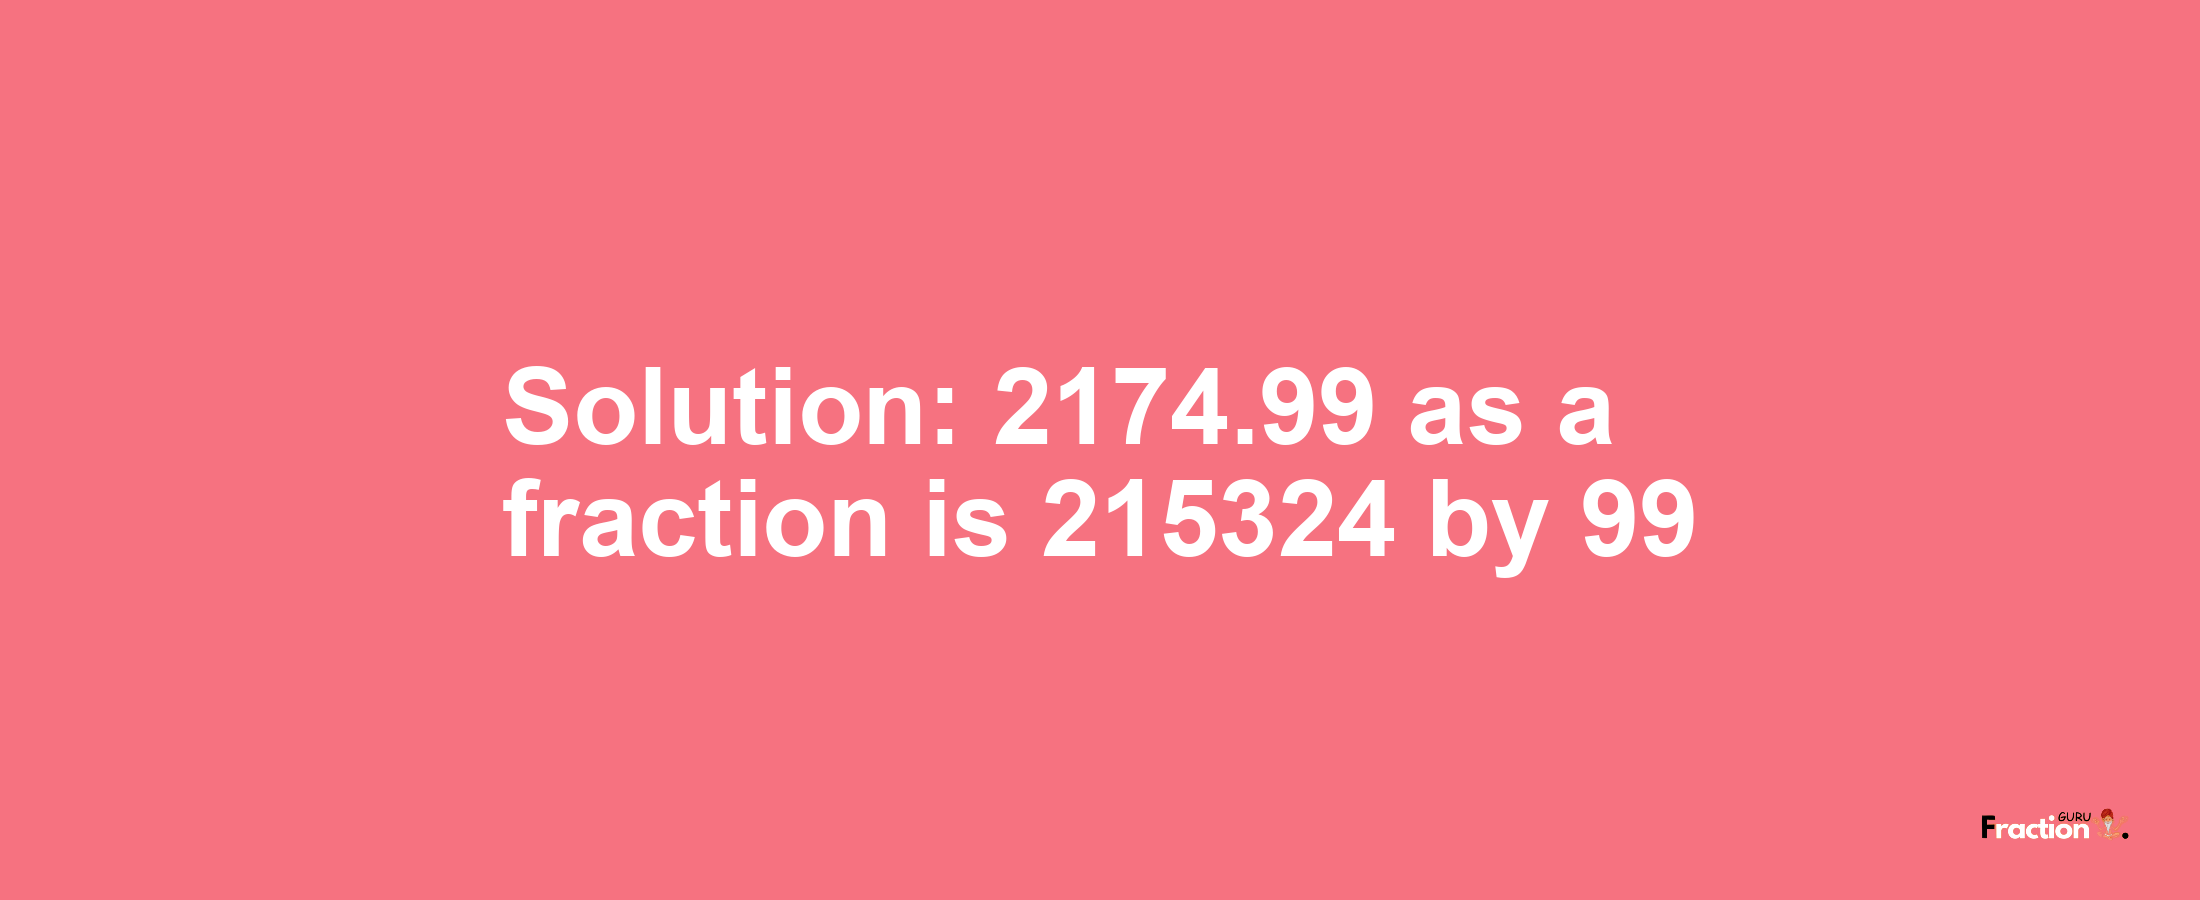 Solution:2174.99 as a fraction is 215324/99